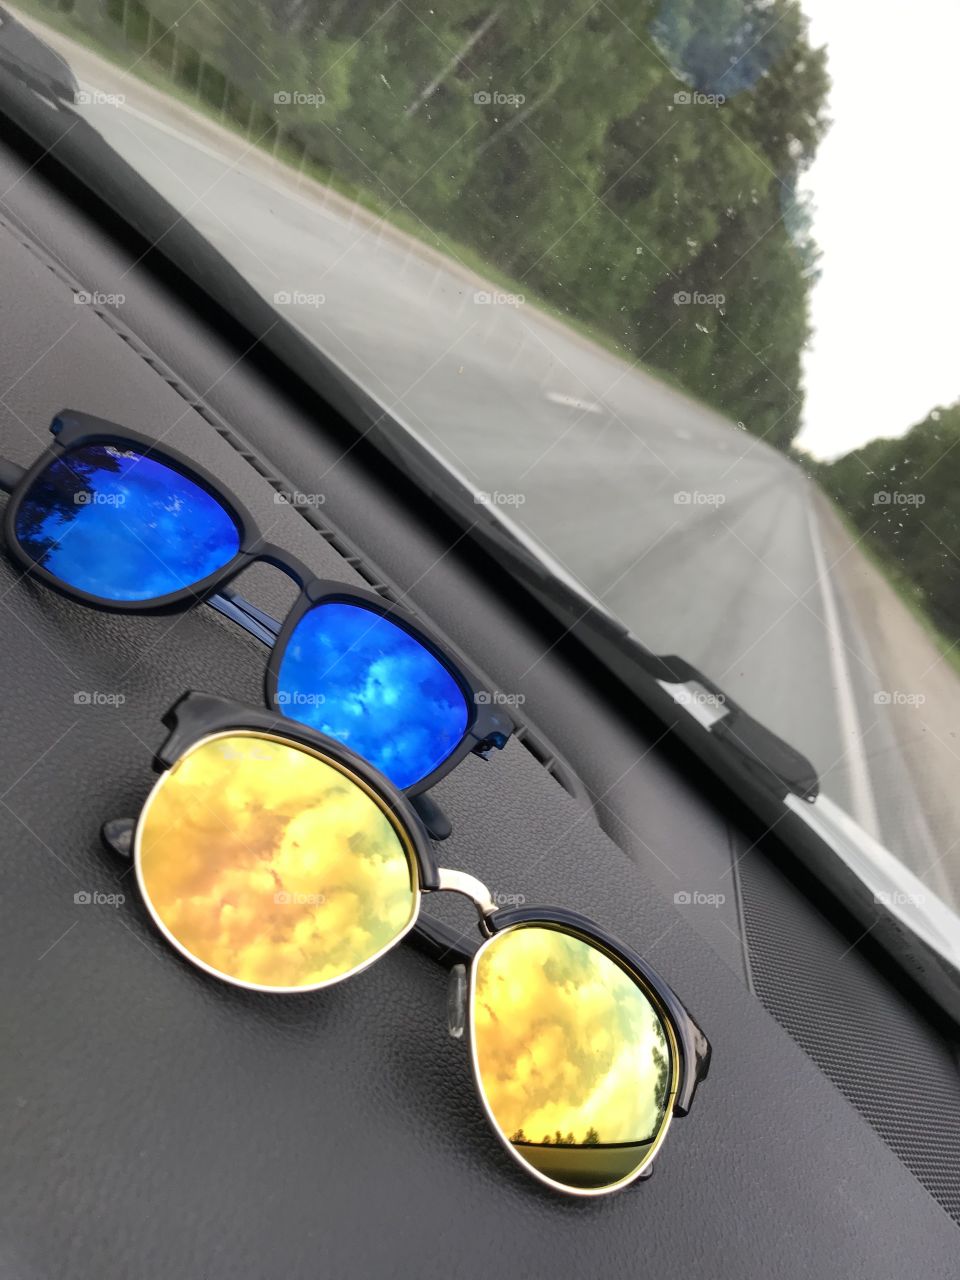 Multicolored sunglasses on the panel in the car. The sky is reflected in the sunglasses.